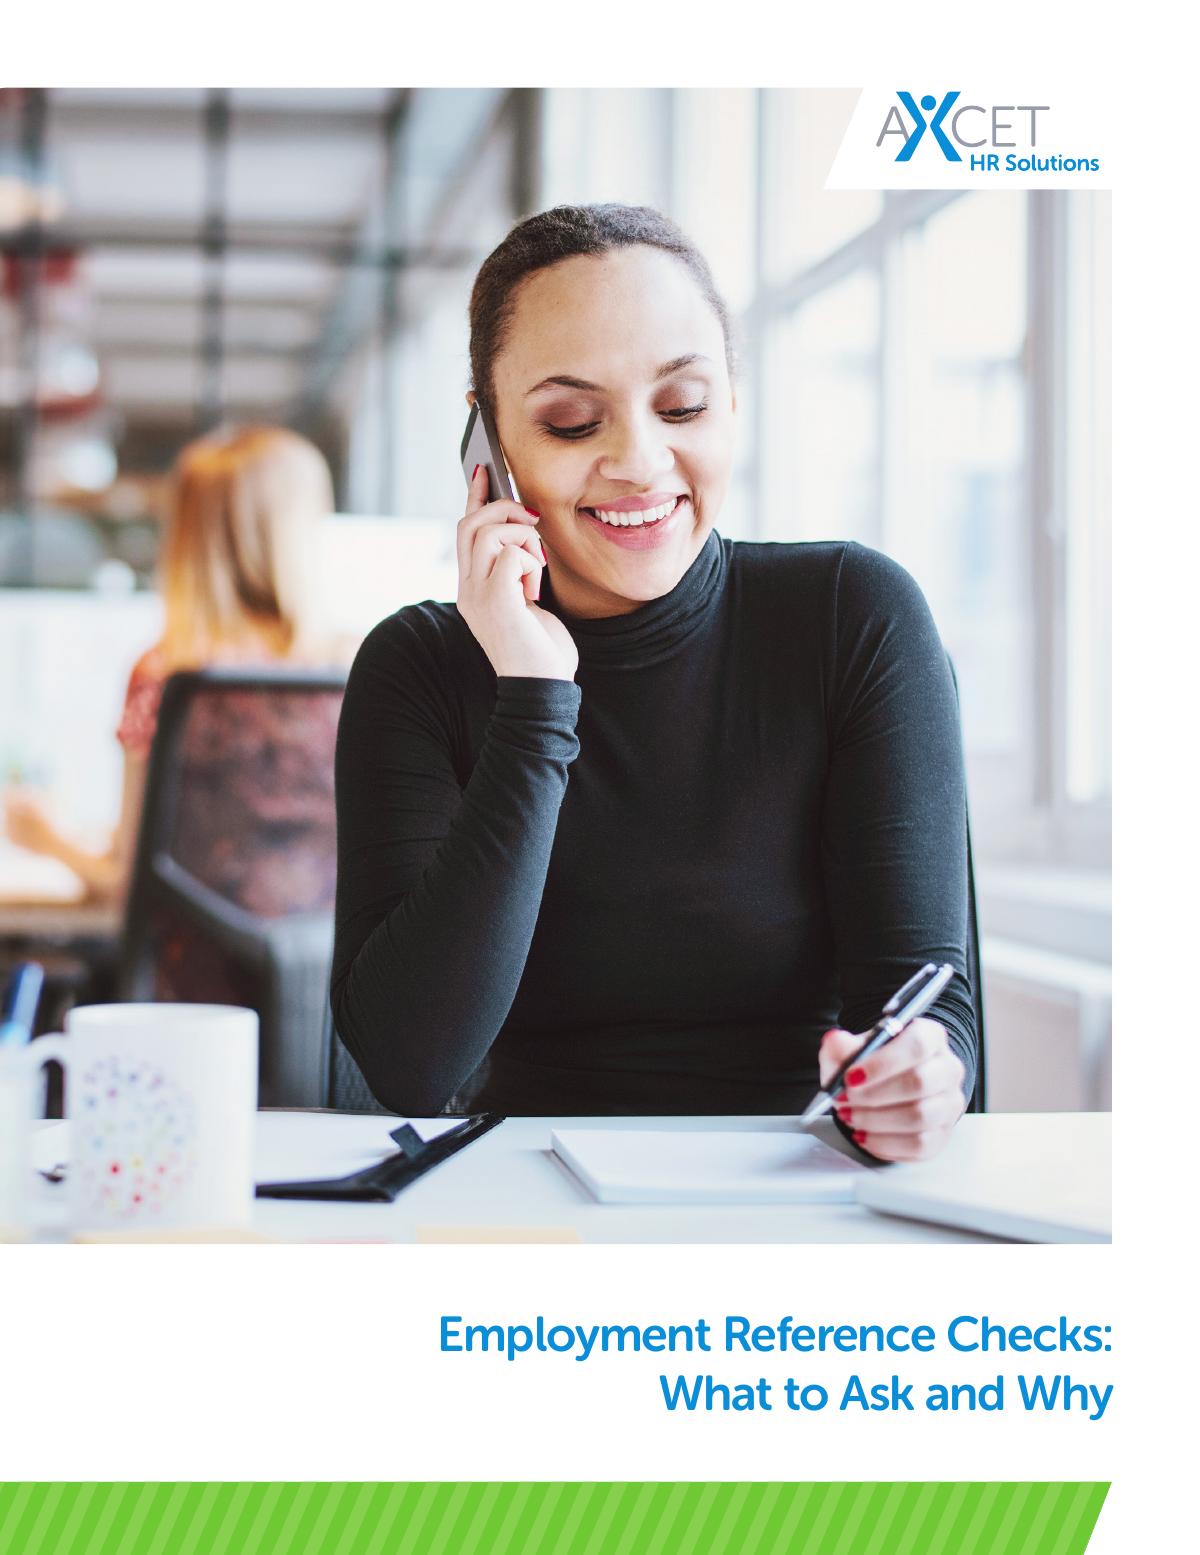 Employment Reference Checks - What to Ask and Why